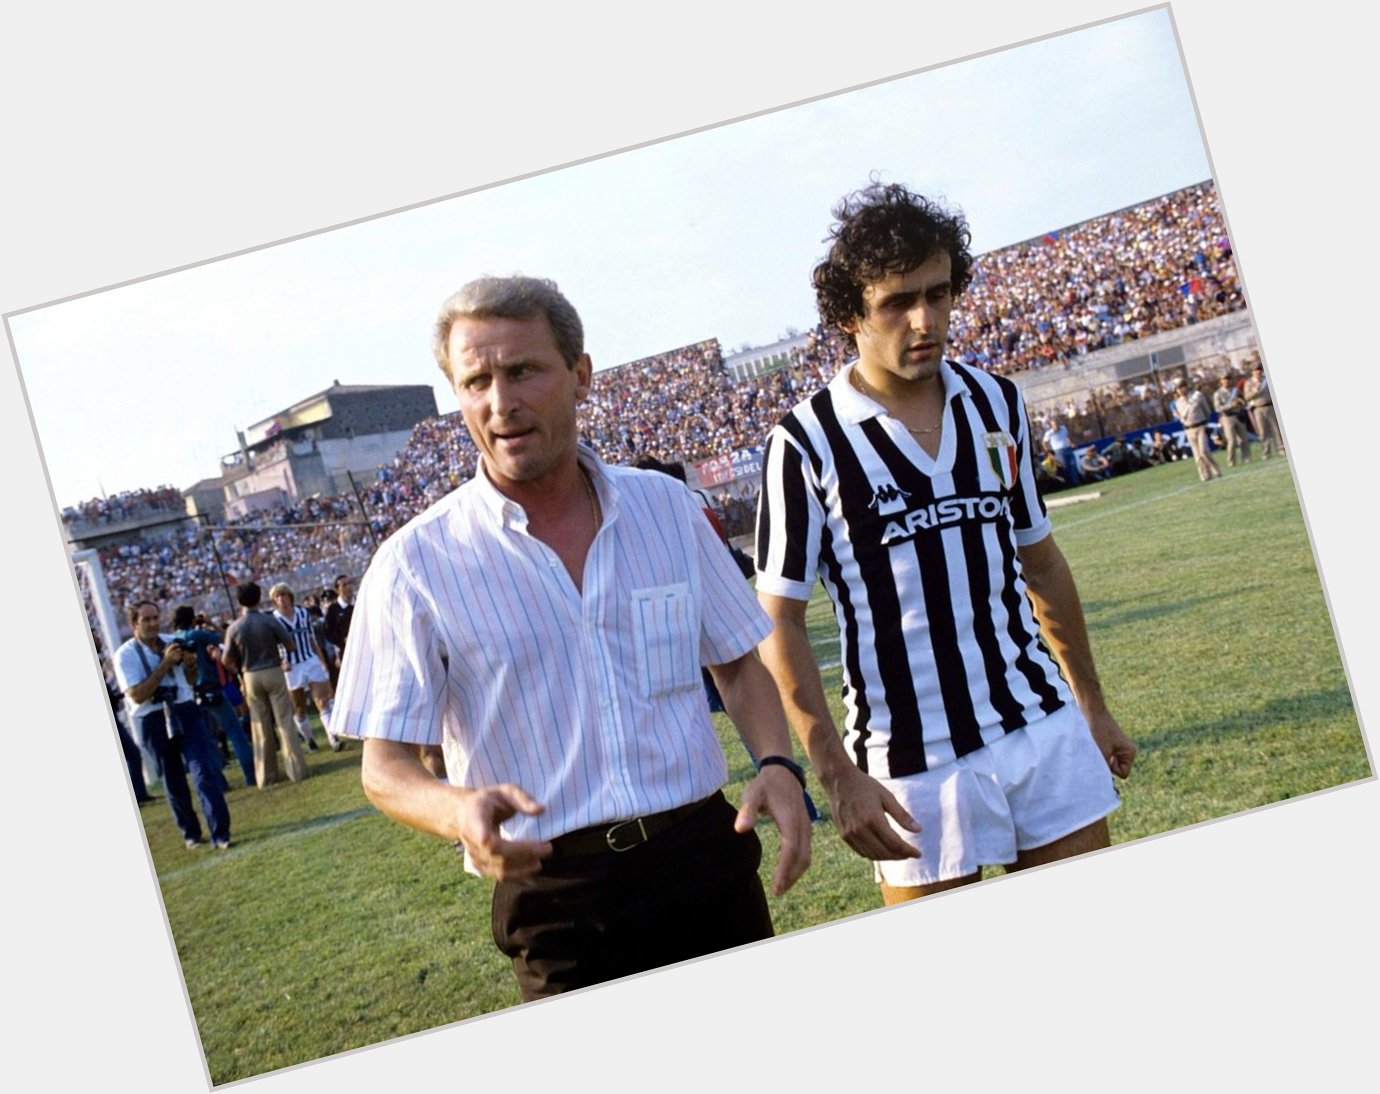 Happy Birthday Giovanni Trapattoni!
Truly one of the greatest of all time 